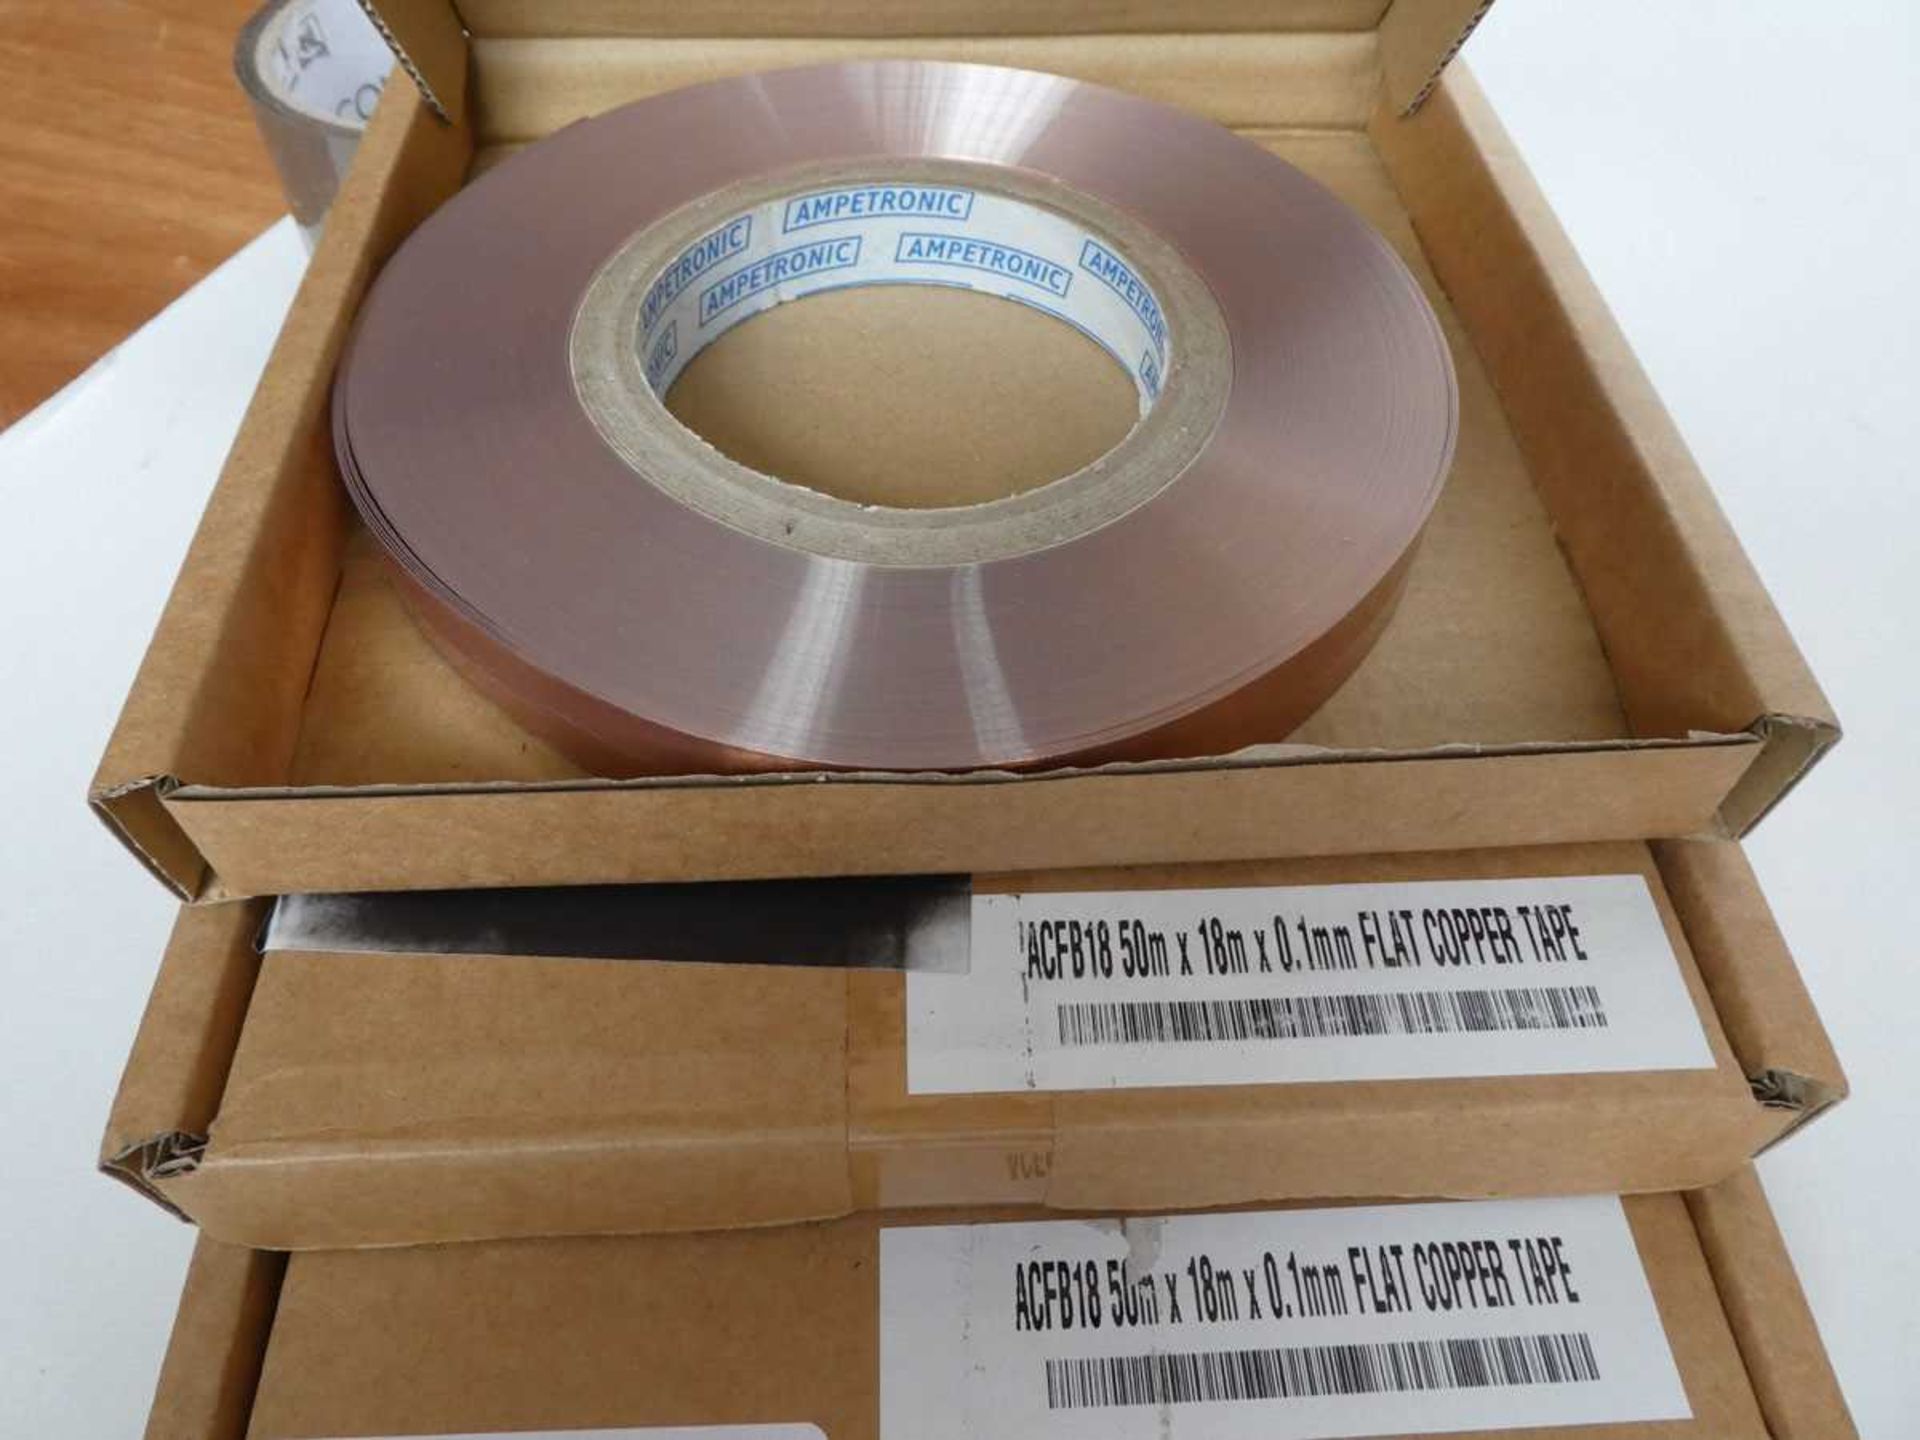 +VAT 3x boxed ACFB18 flat copper tape (50mx18mmx0.1mm) - Image 2 of 2